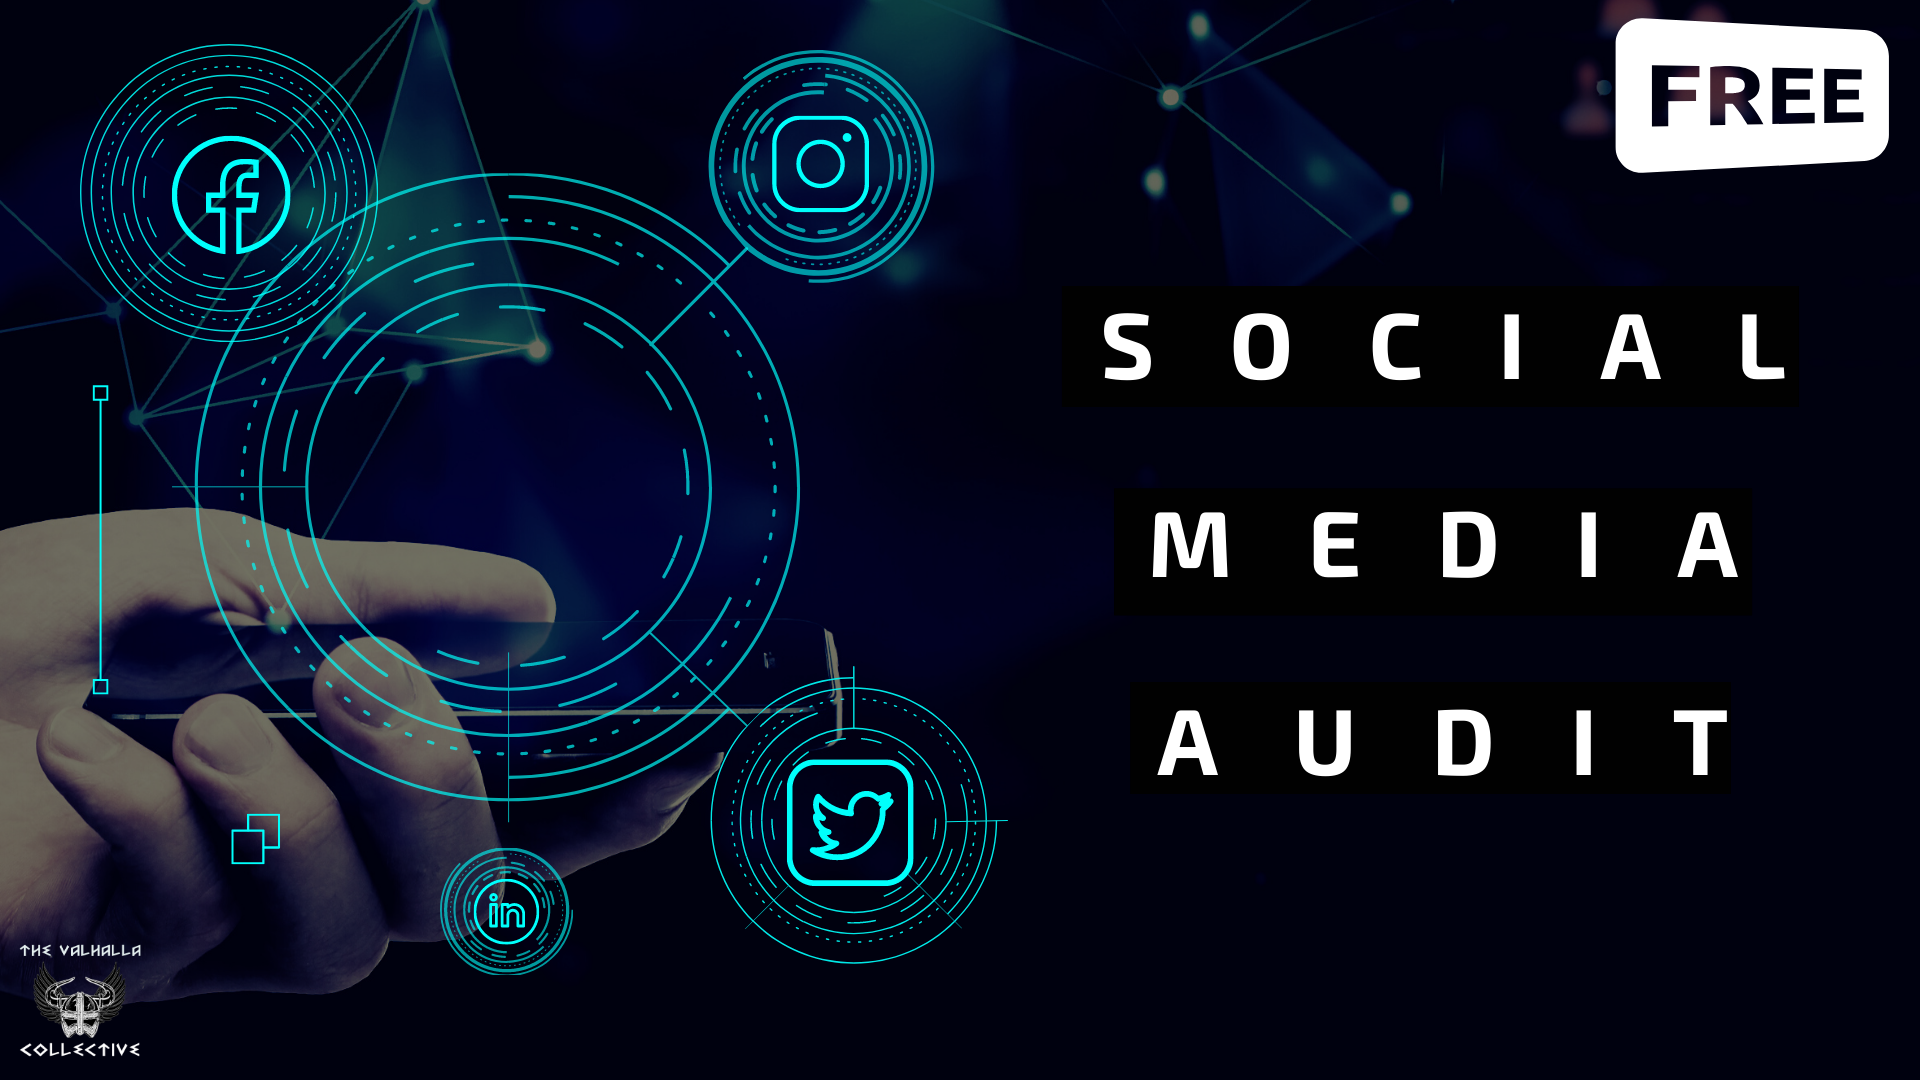 The Valhalla Collective FREE Social Media Audit